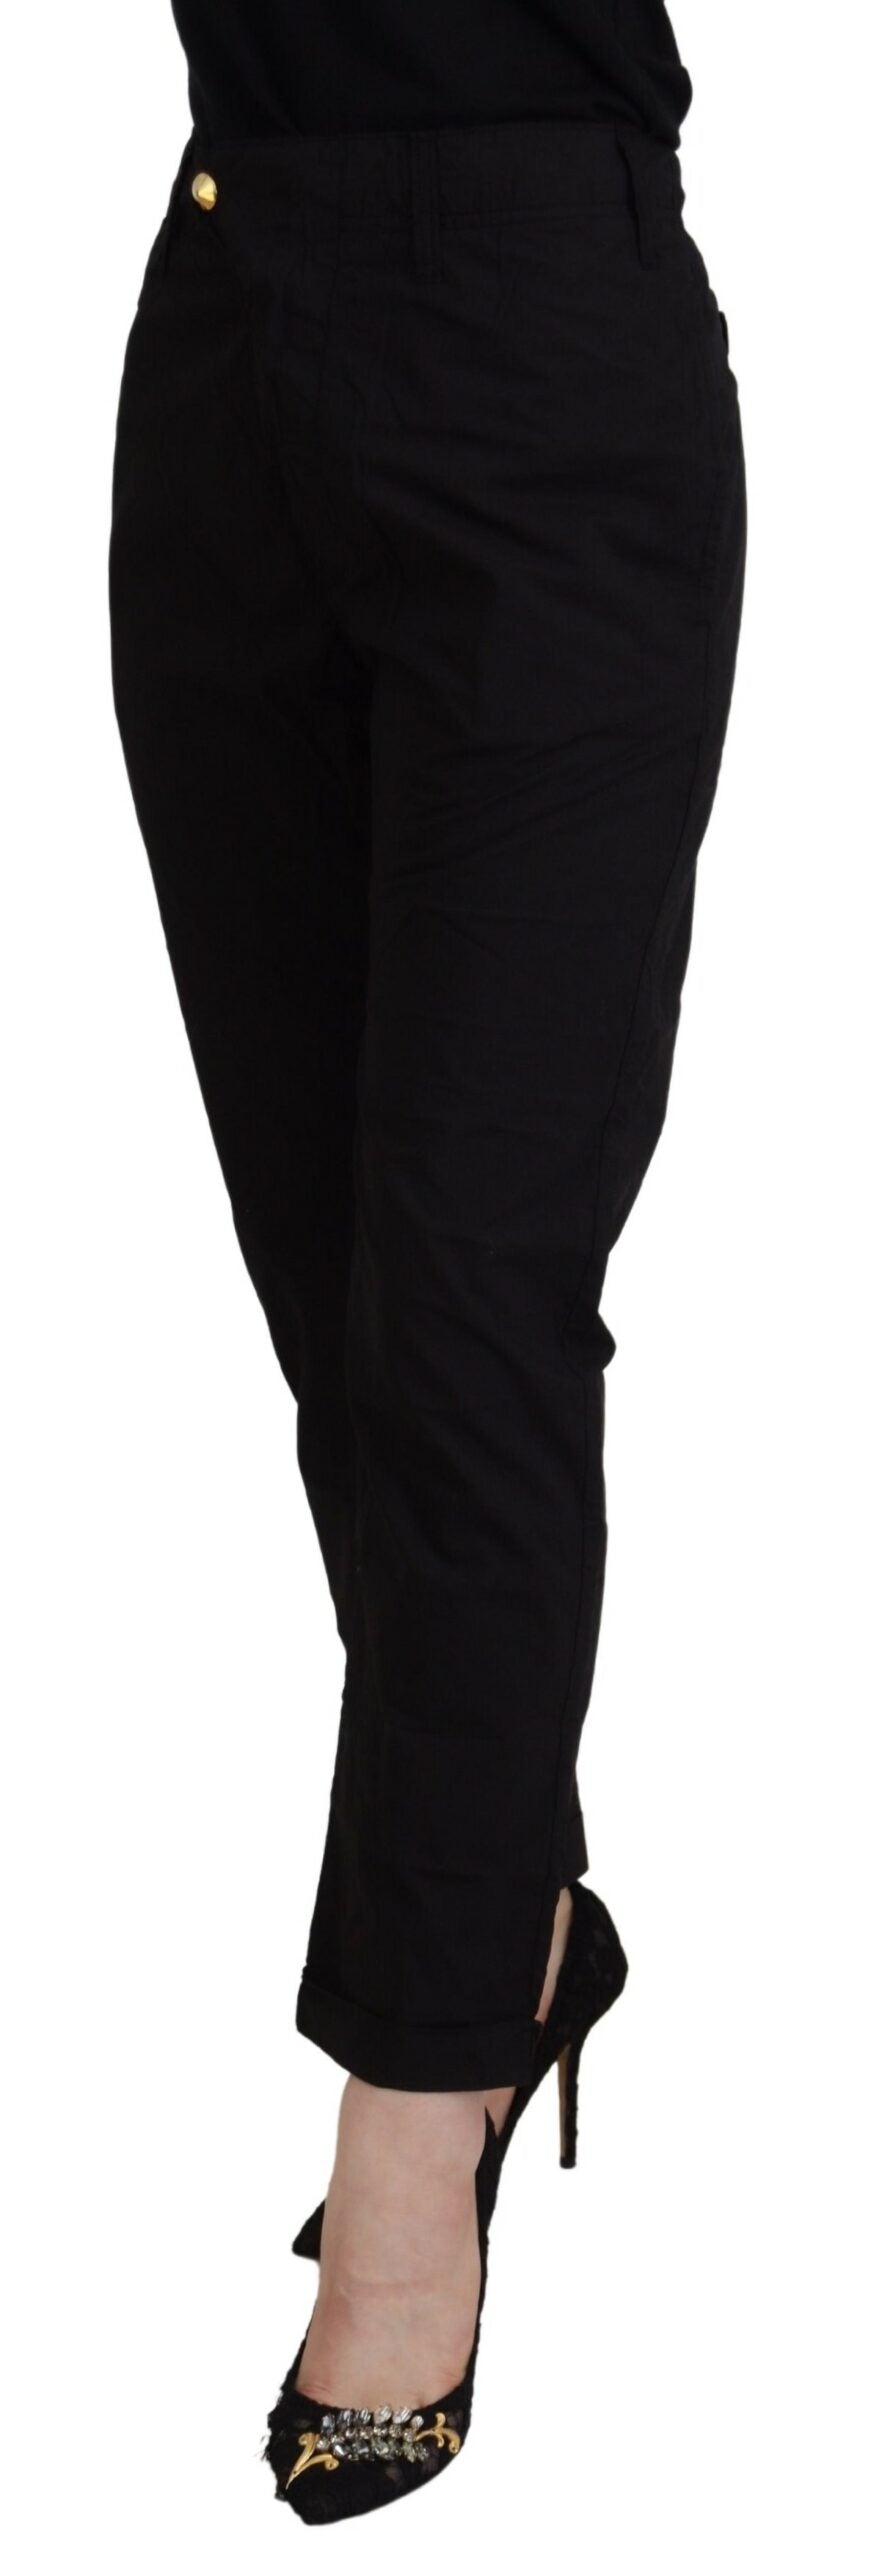 CYCLE Chic Tapered Black Cotton Pants